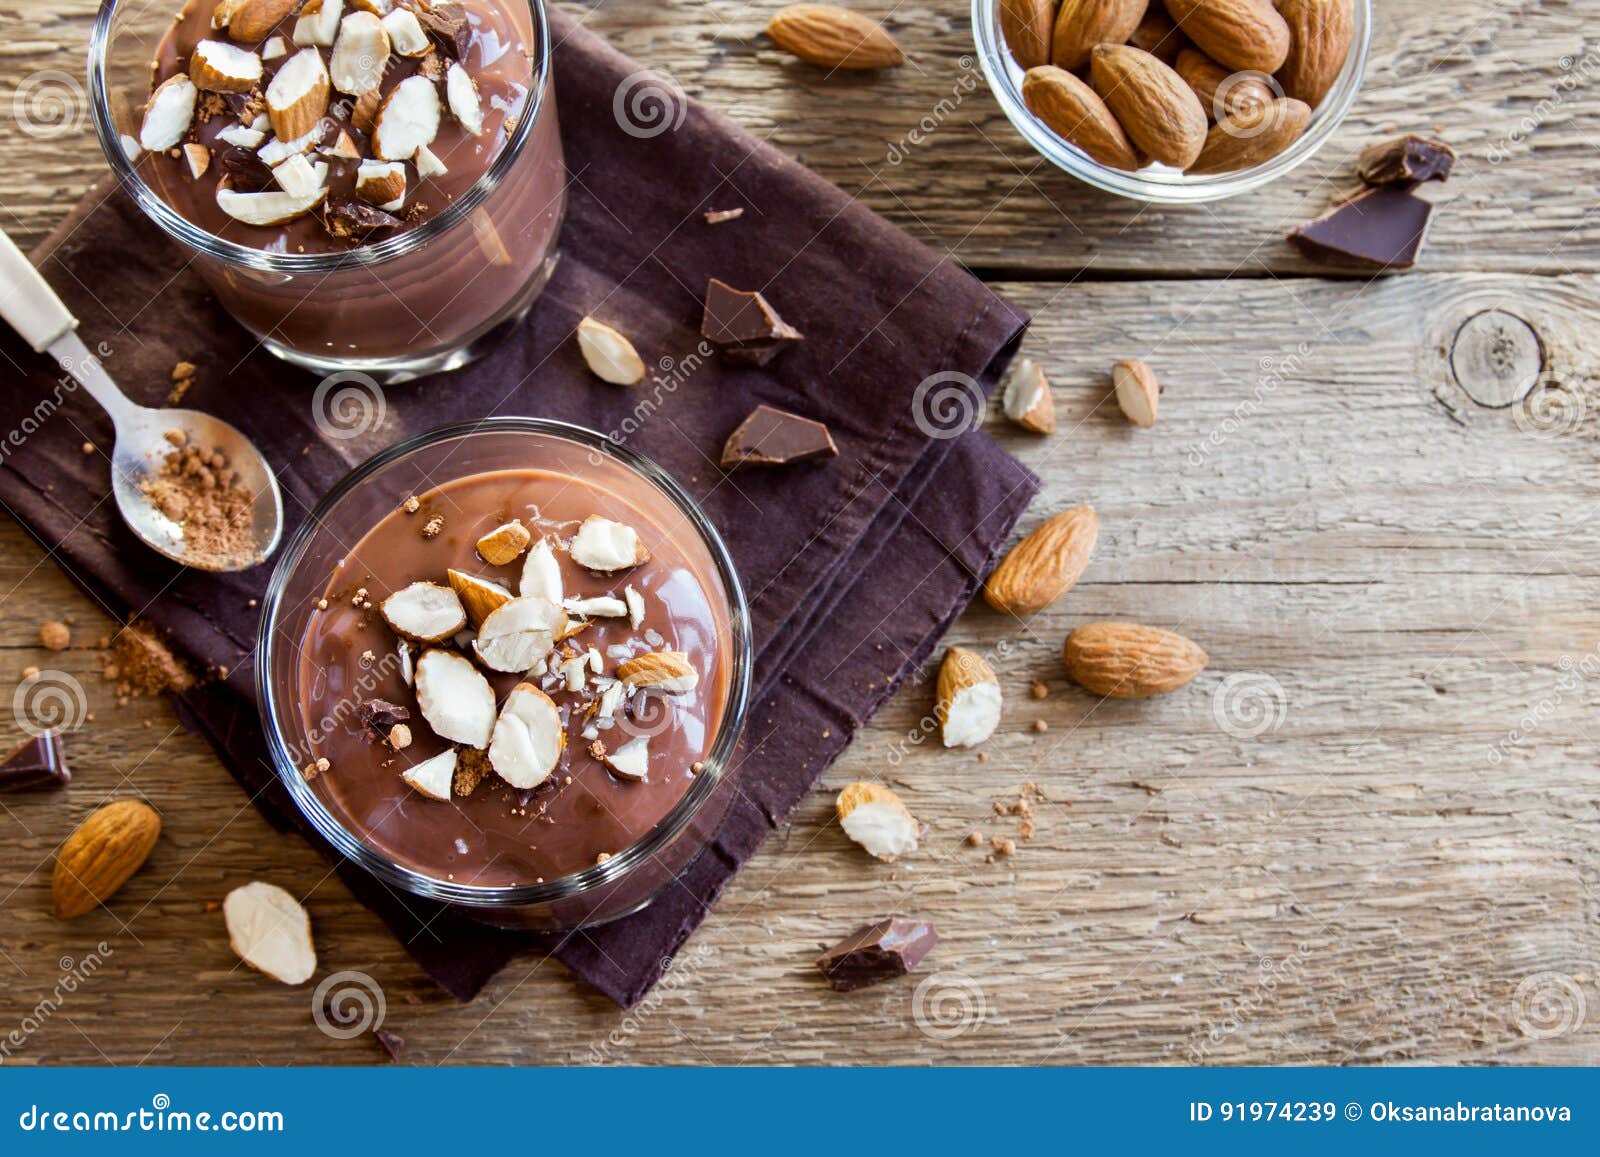 chocolate mousse with almond